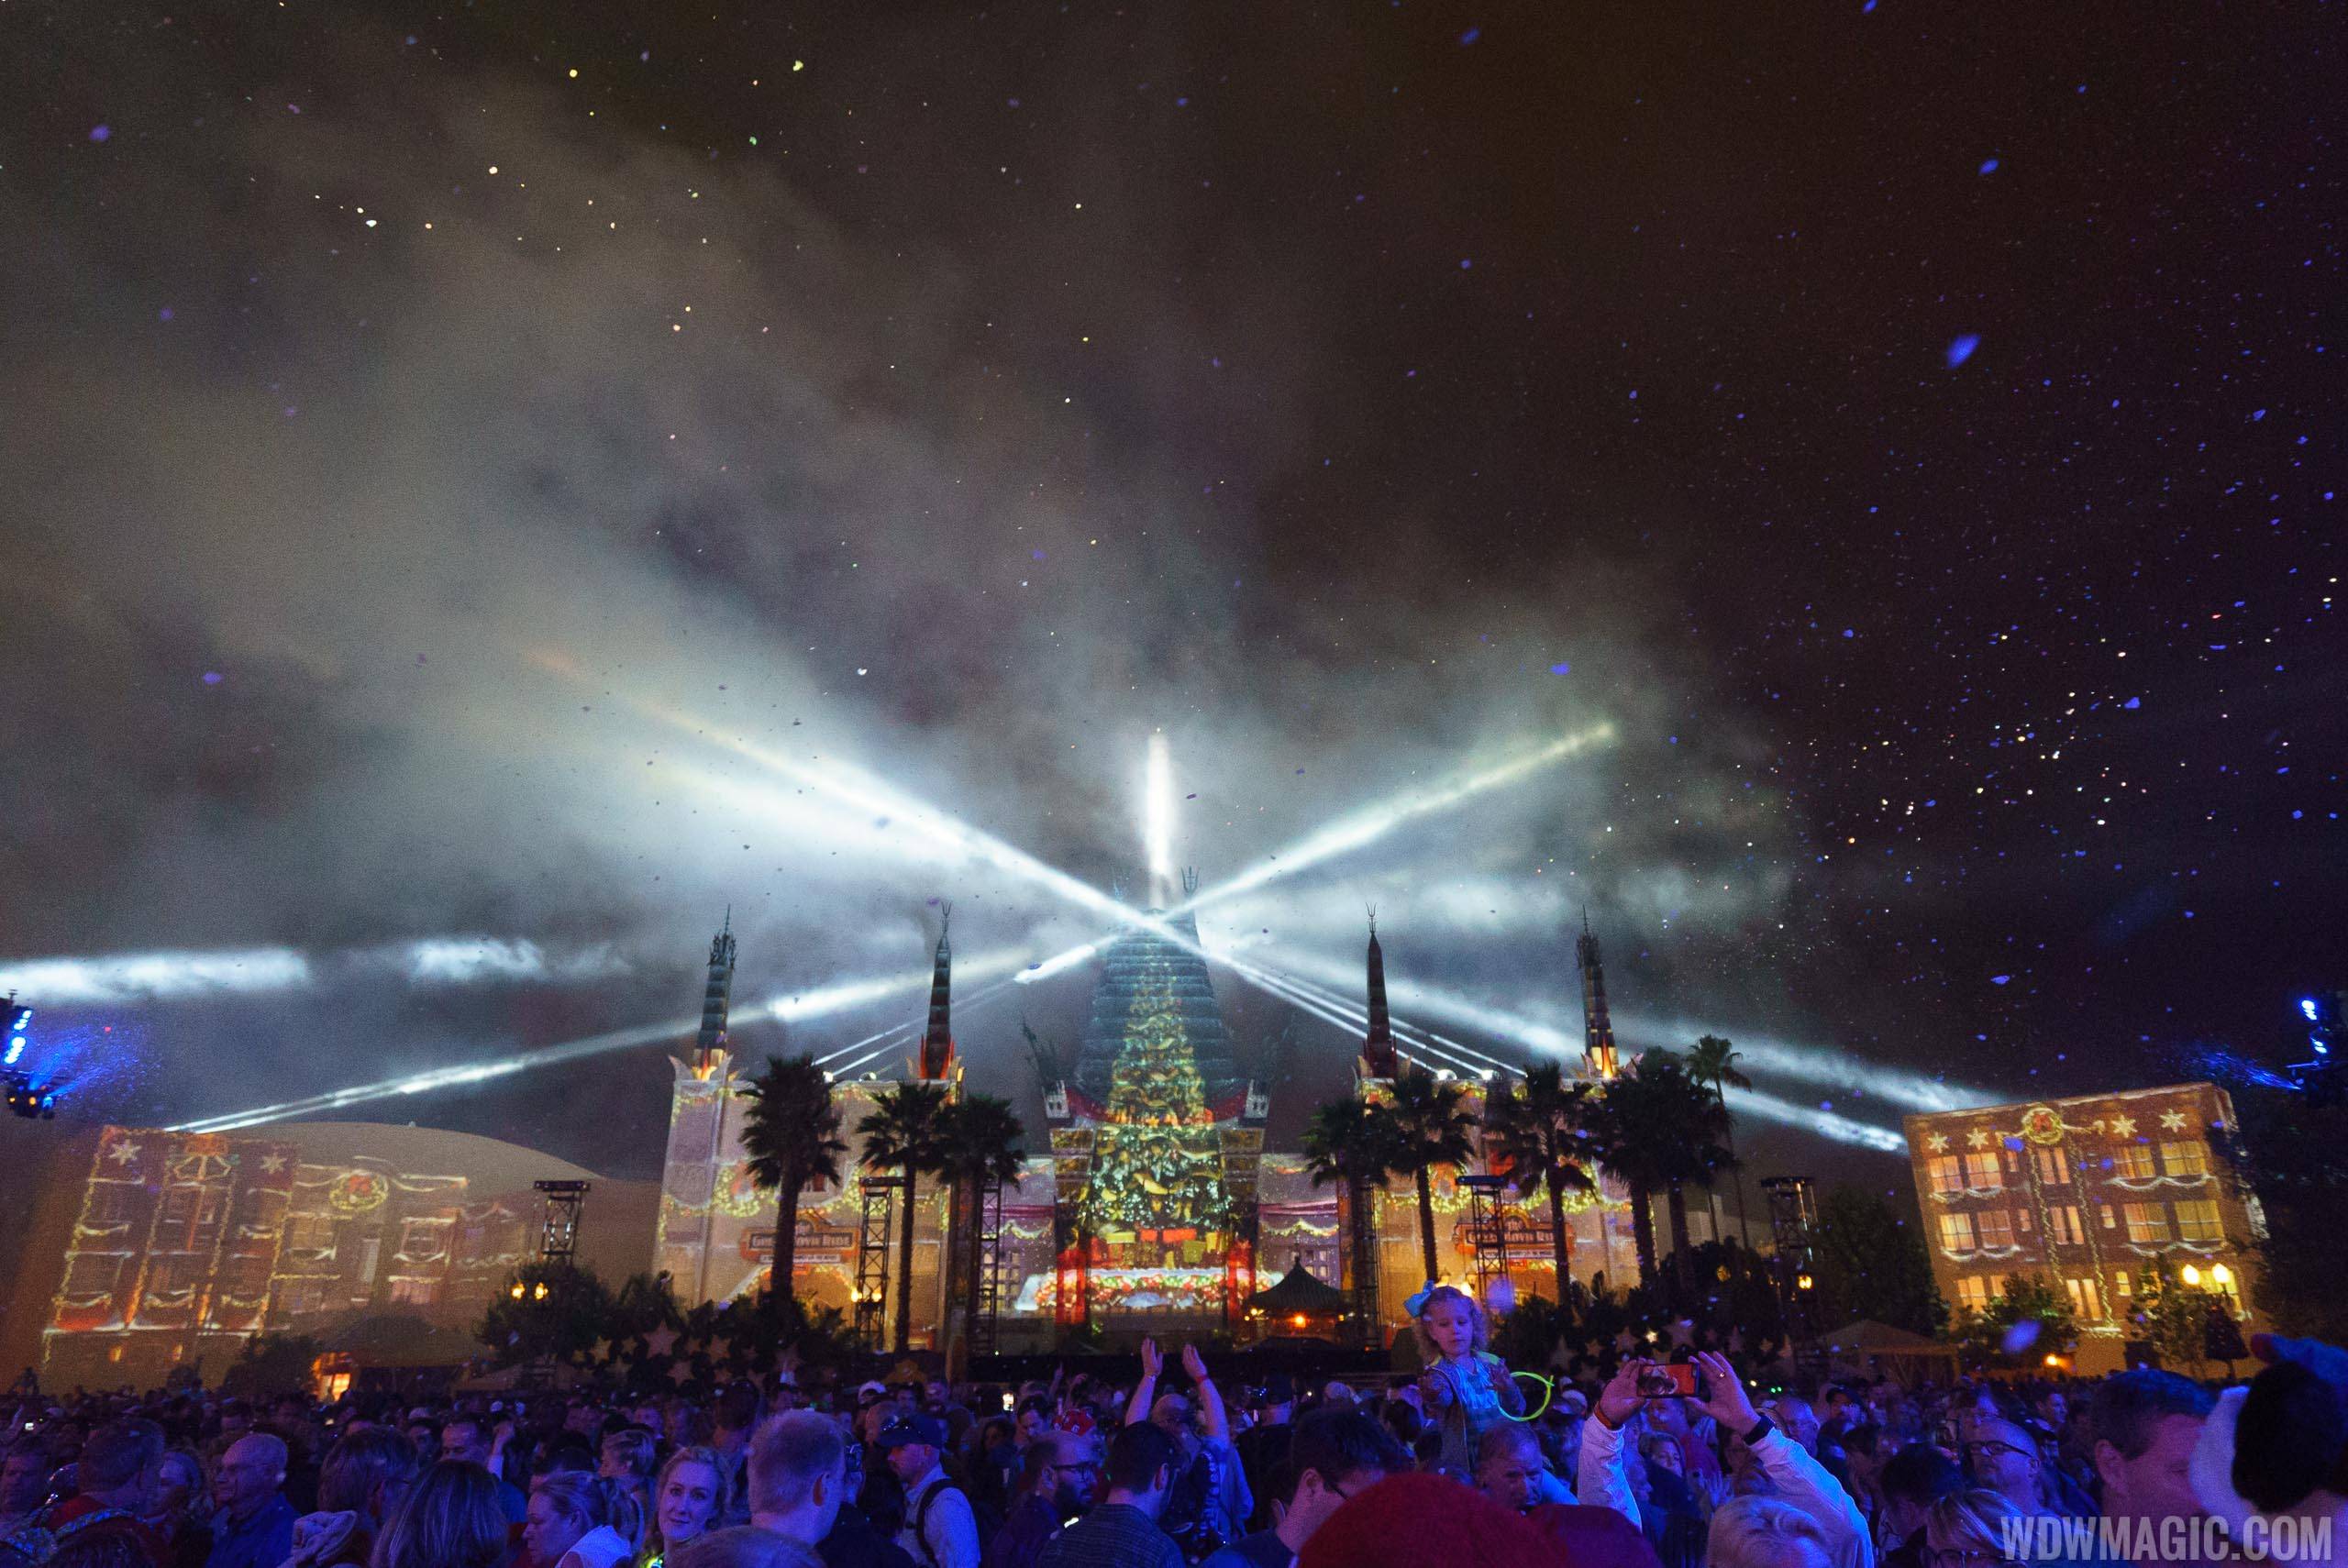 Jingle Bell, Jingle BAM! not returning to Disney's Hollywood Studios for the 2022 holiday season